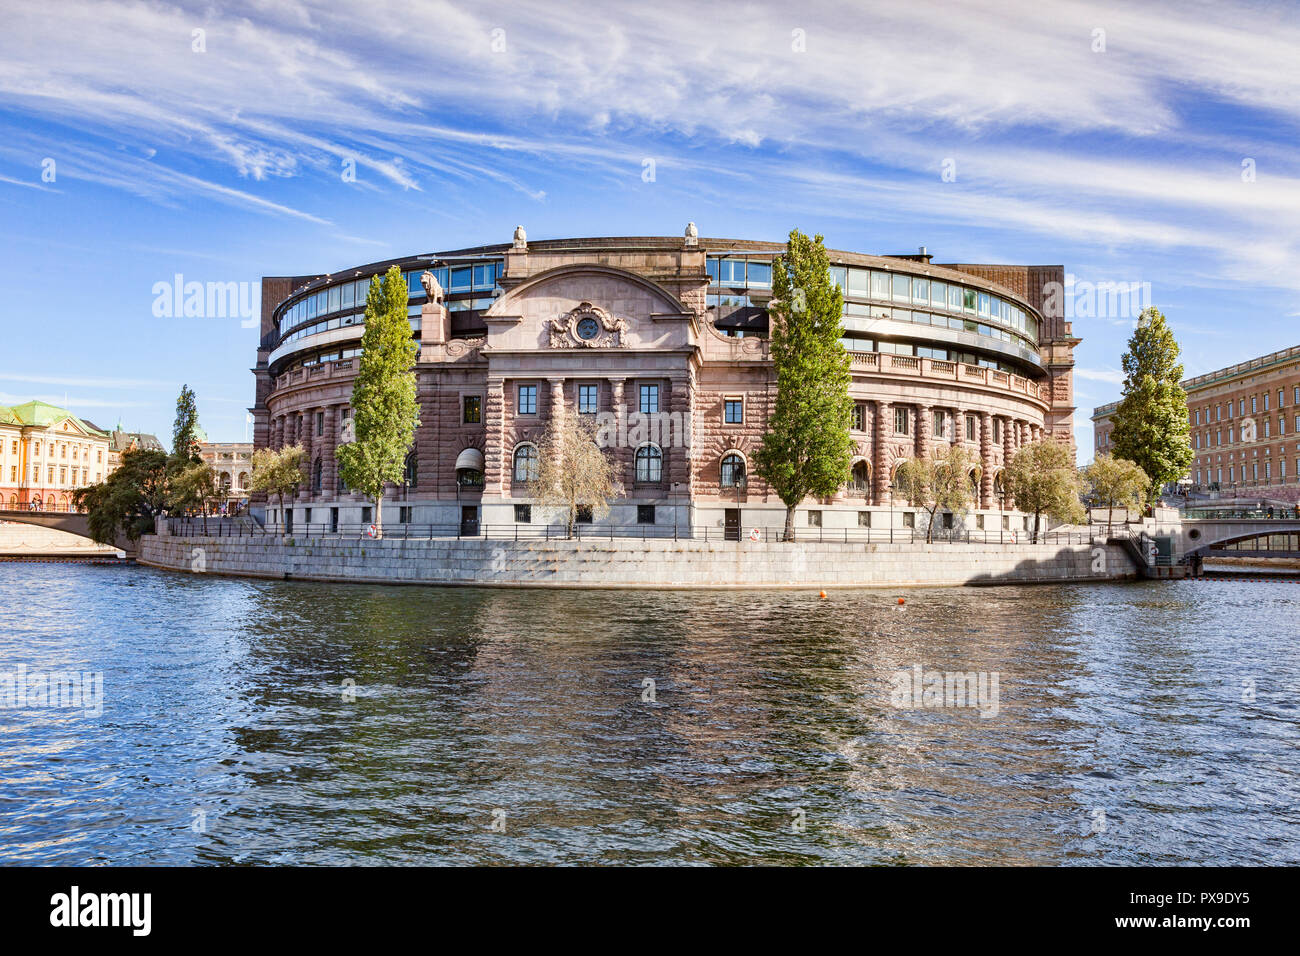 16 September 2018: Stockholm, Seden - The Riksdaghuset, or Parliament Building, on a sunny autumn weekend. Stock Photo